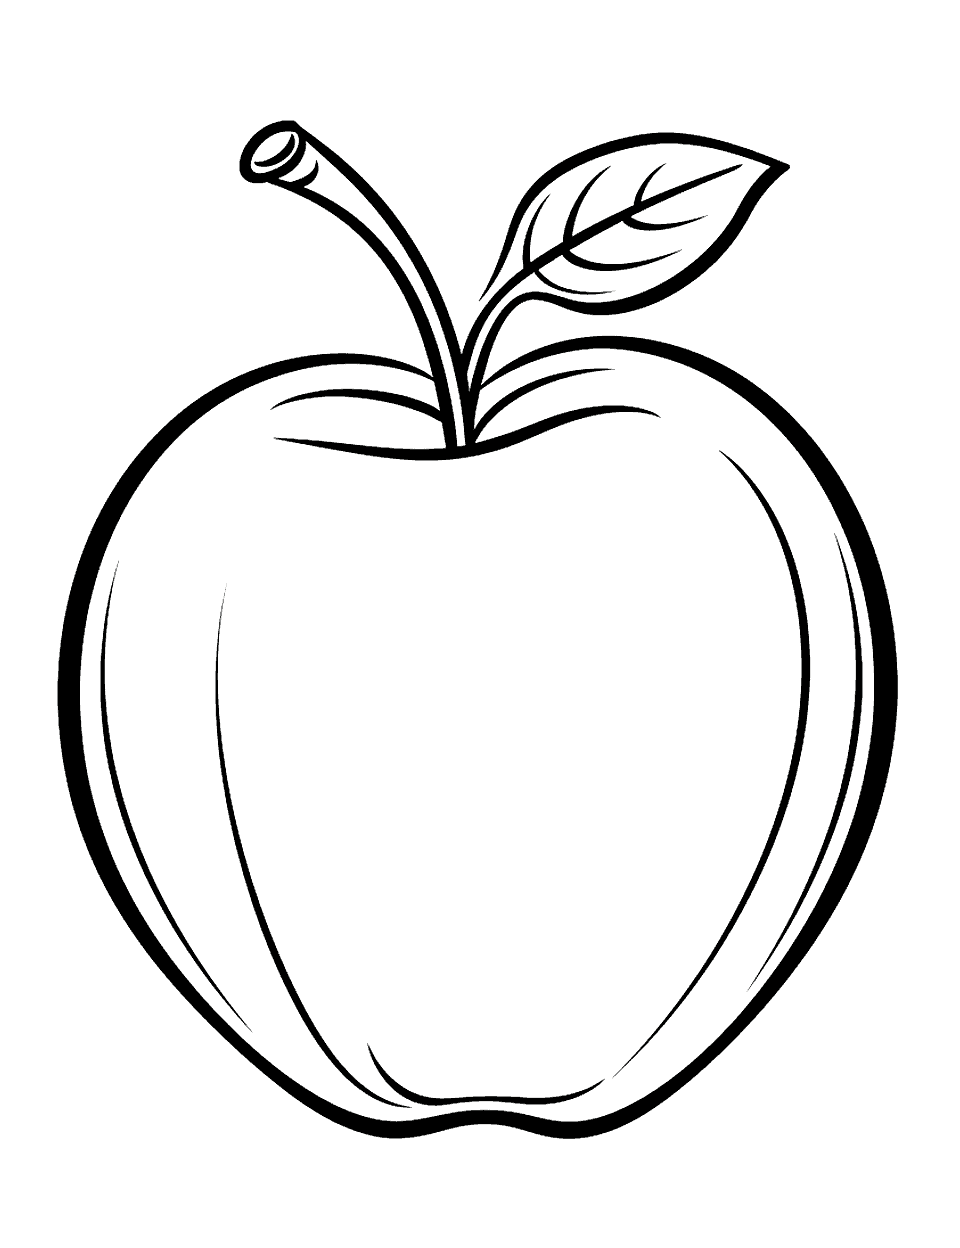 Snow White’s Apple Coloring Page - An apple reminiscent of the one from Snow White’s story.